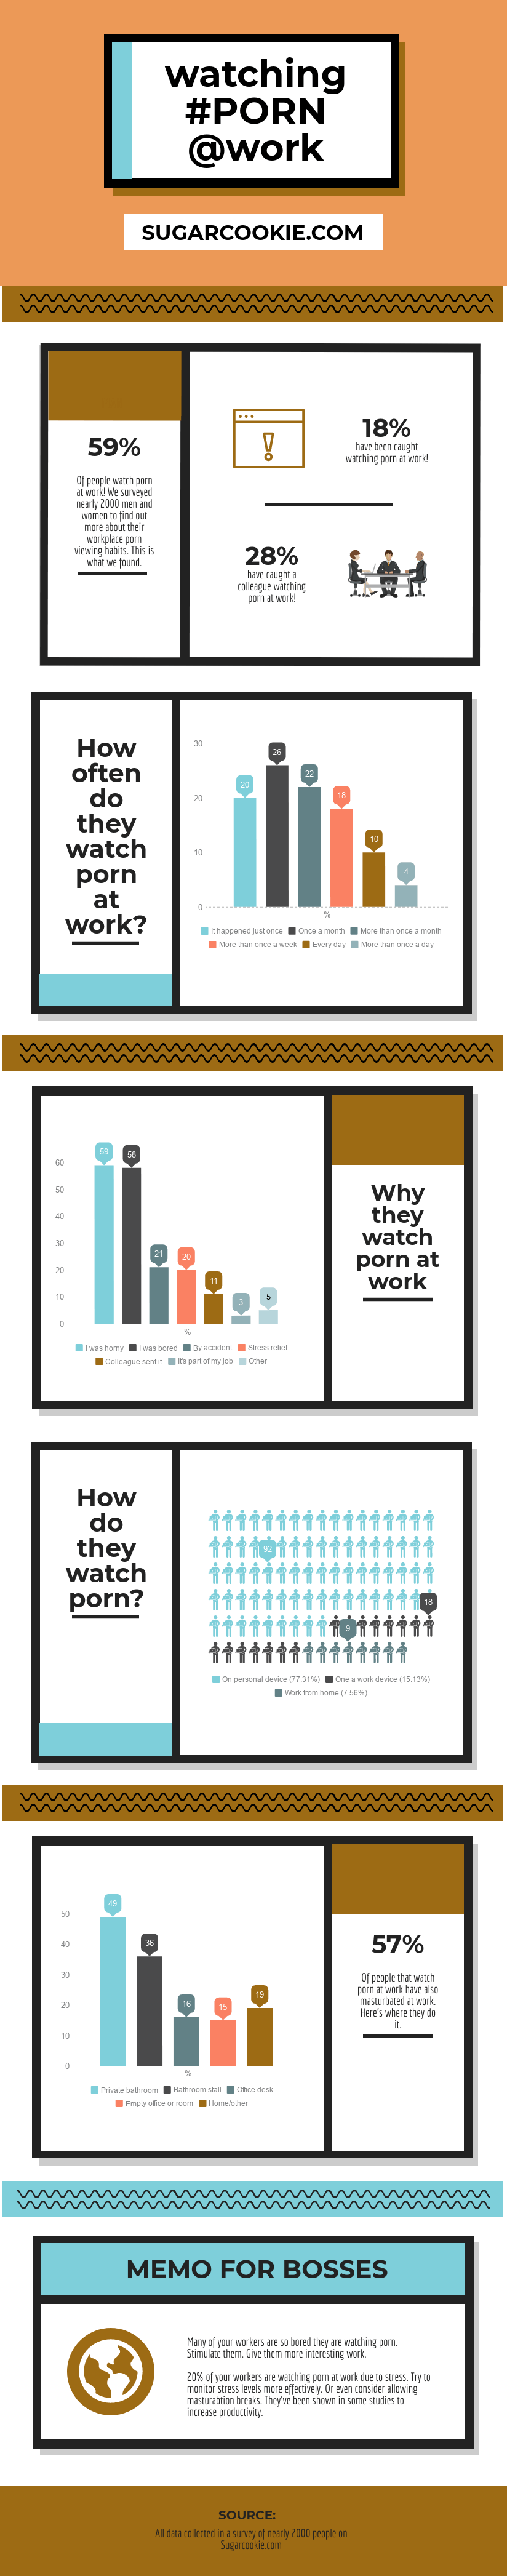 Watching porn at work infographic